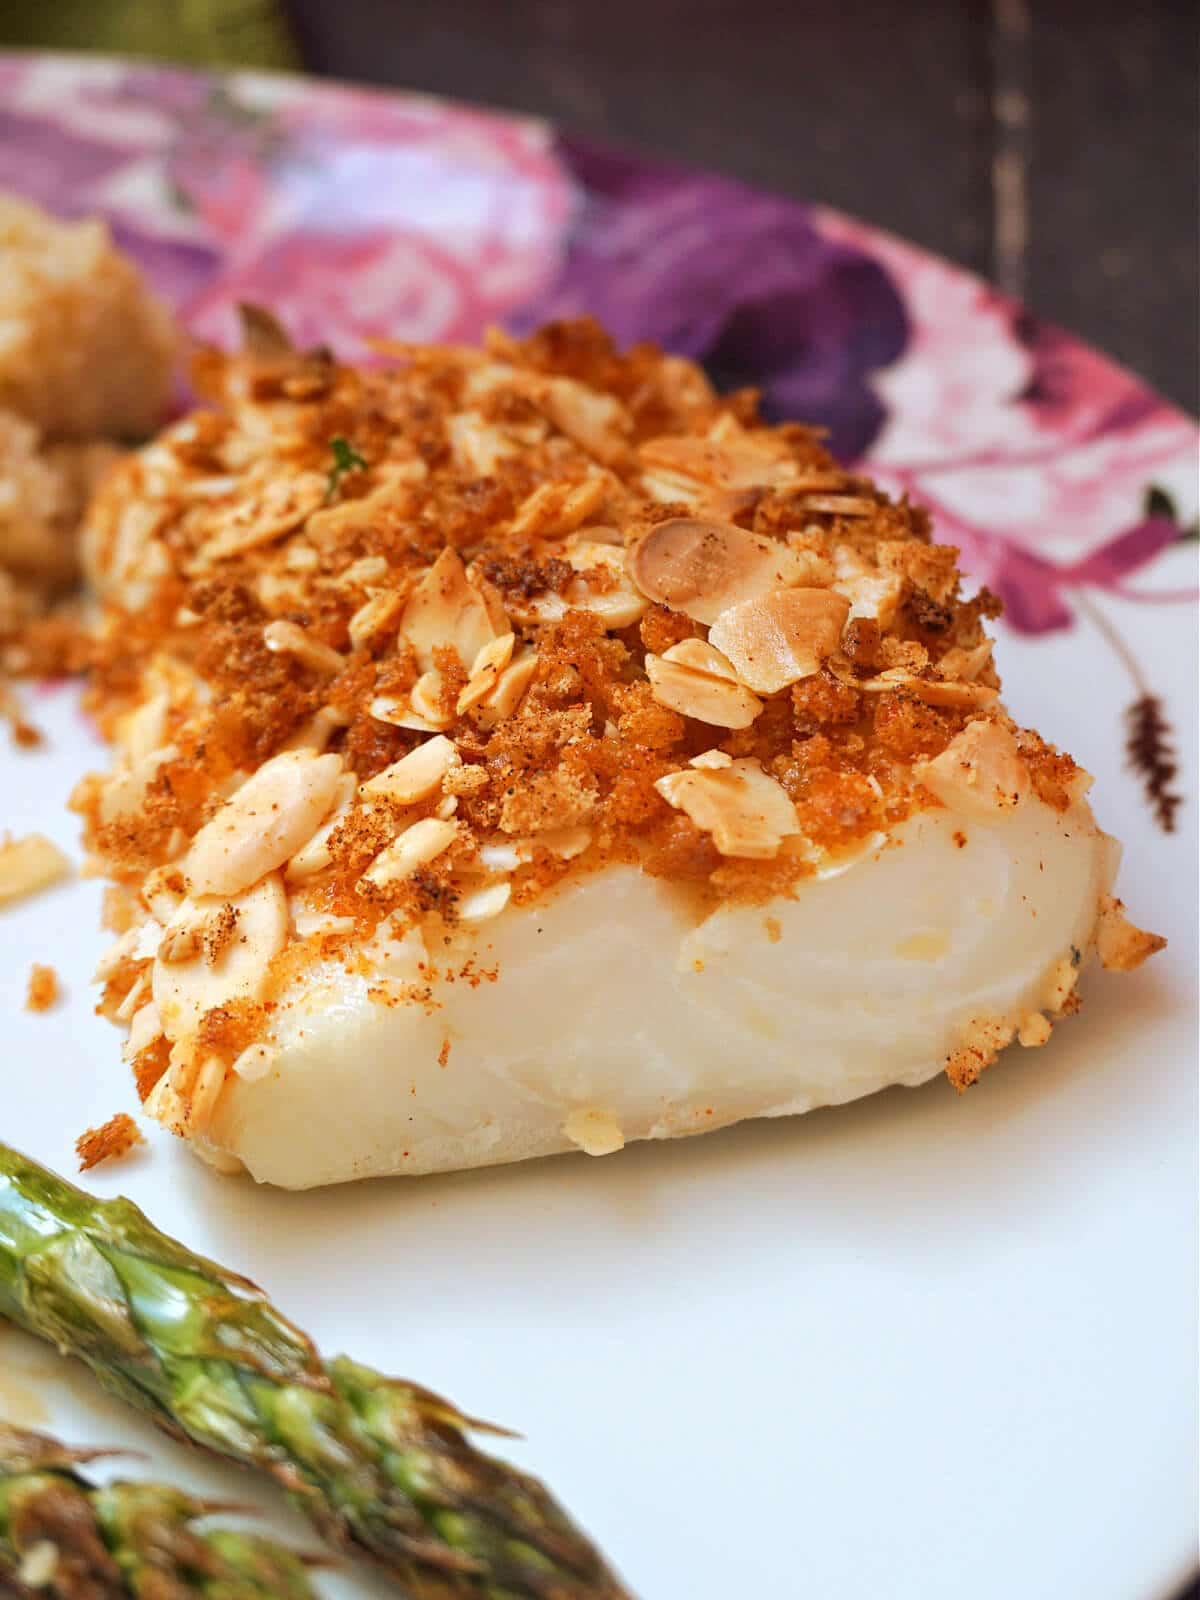 A crusted cod fillet on a white plate